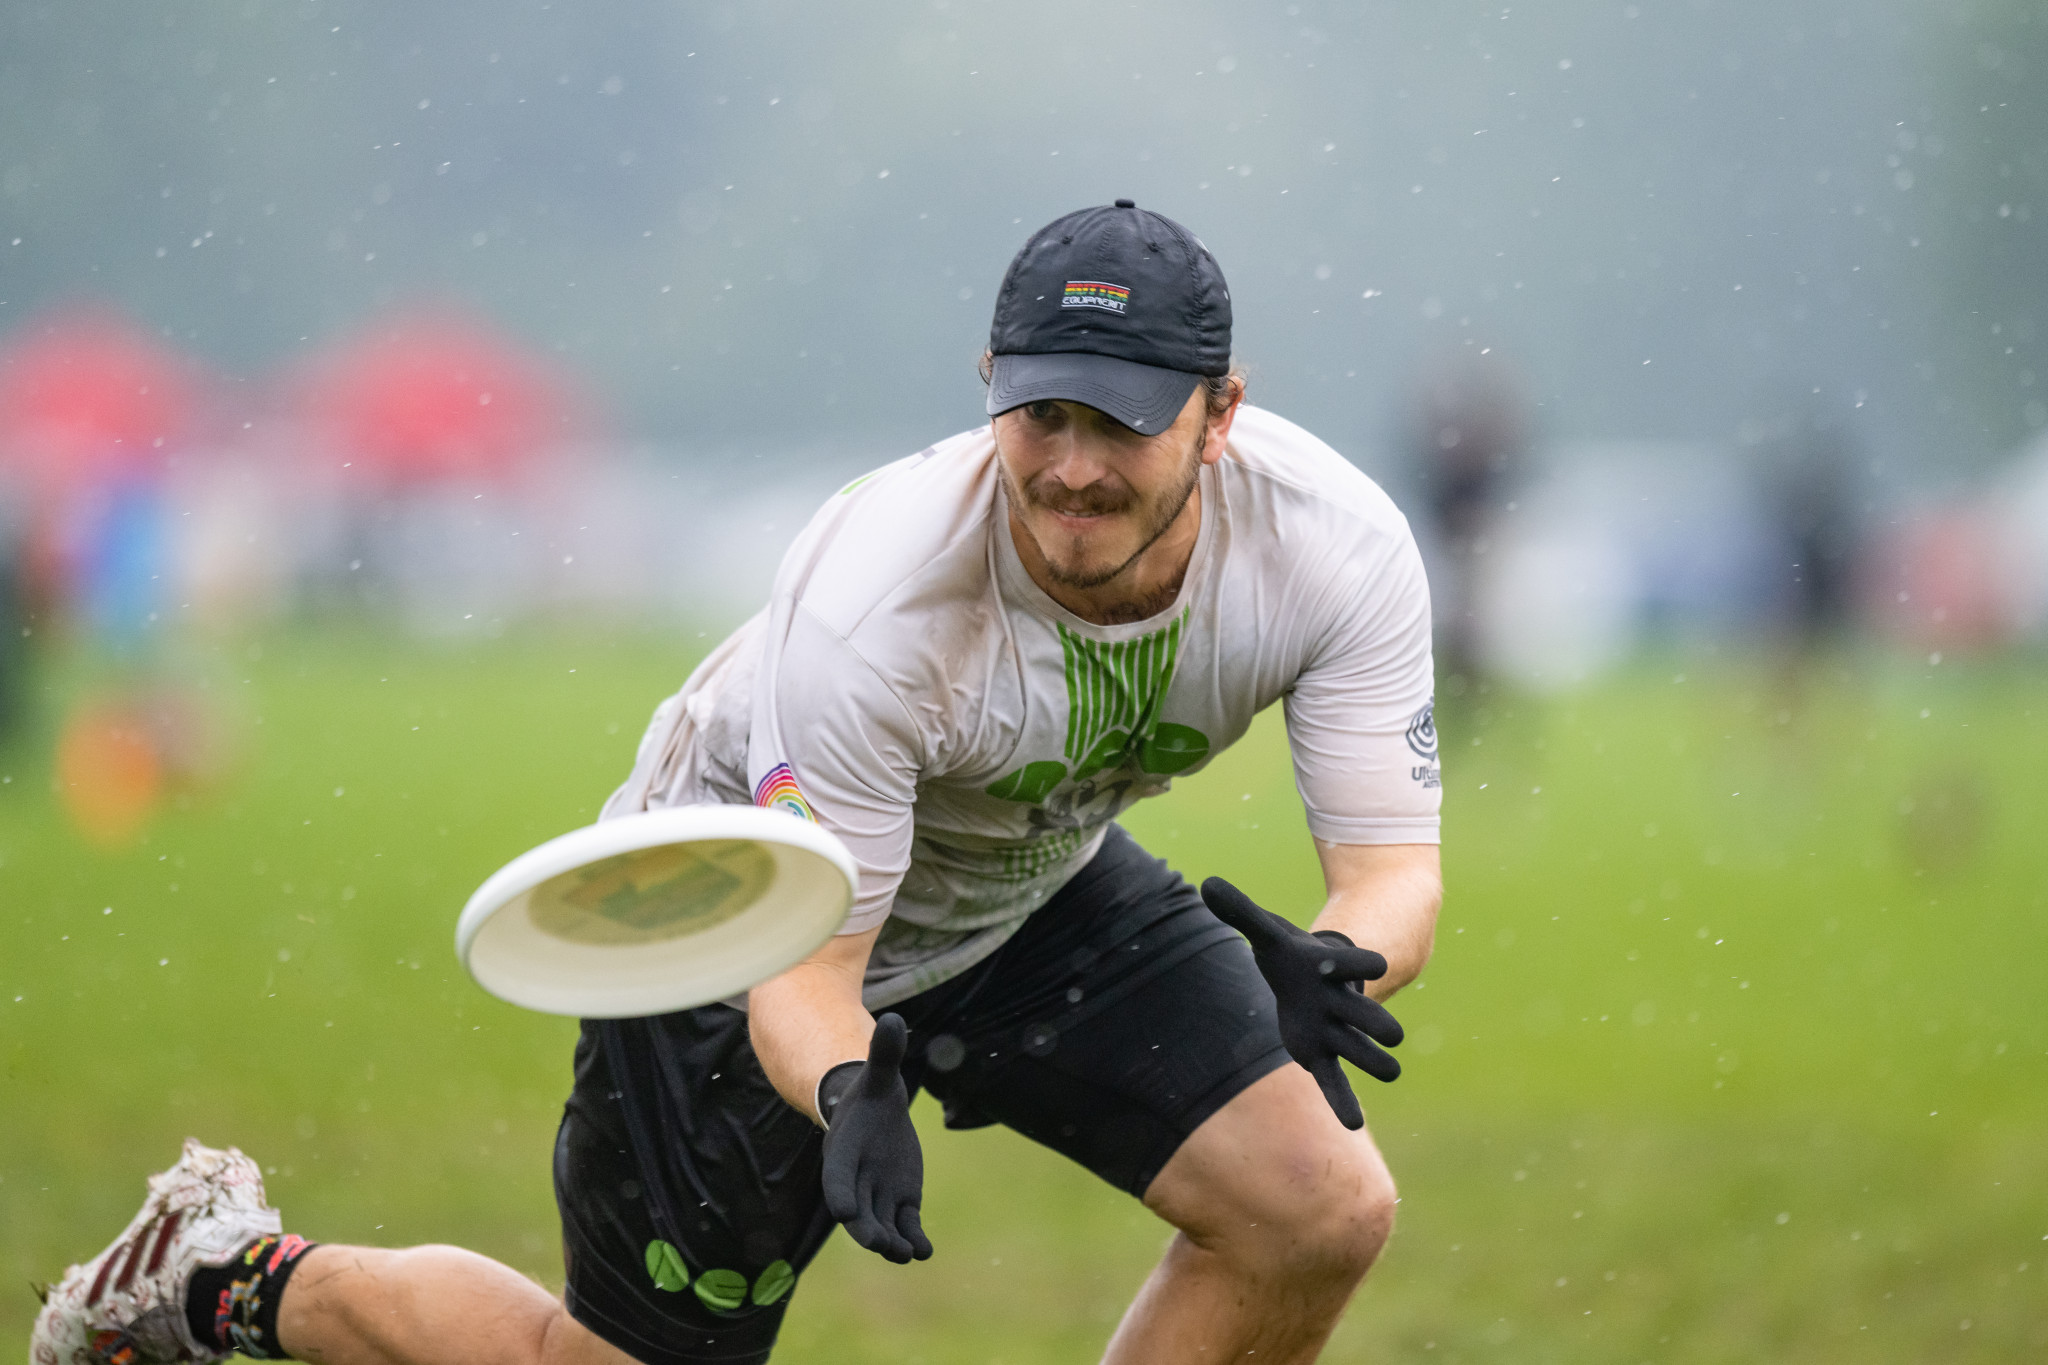 Tom Tullet of Melbourne Ellipsis kept his eye on the disc during 
difficult weather conditions ©Samuel Hotaling for UltiPhotos